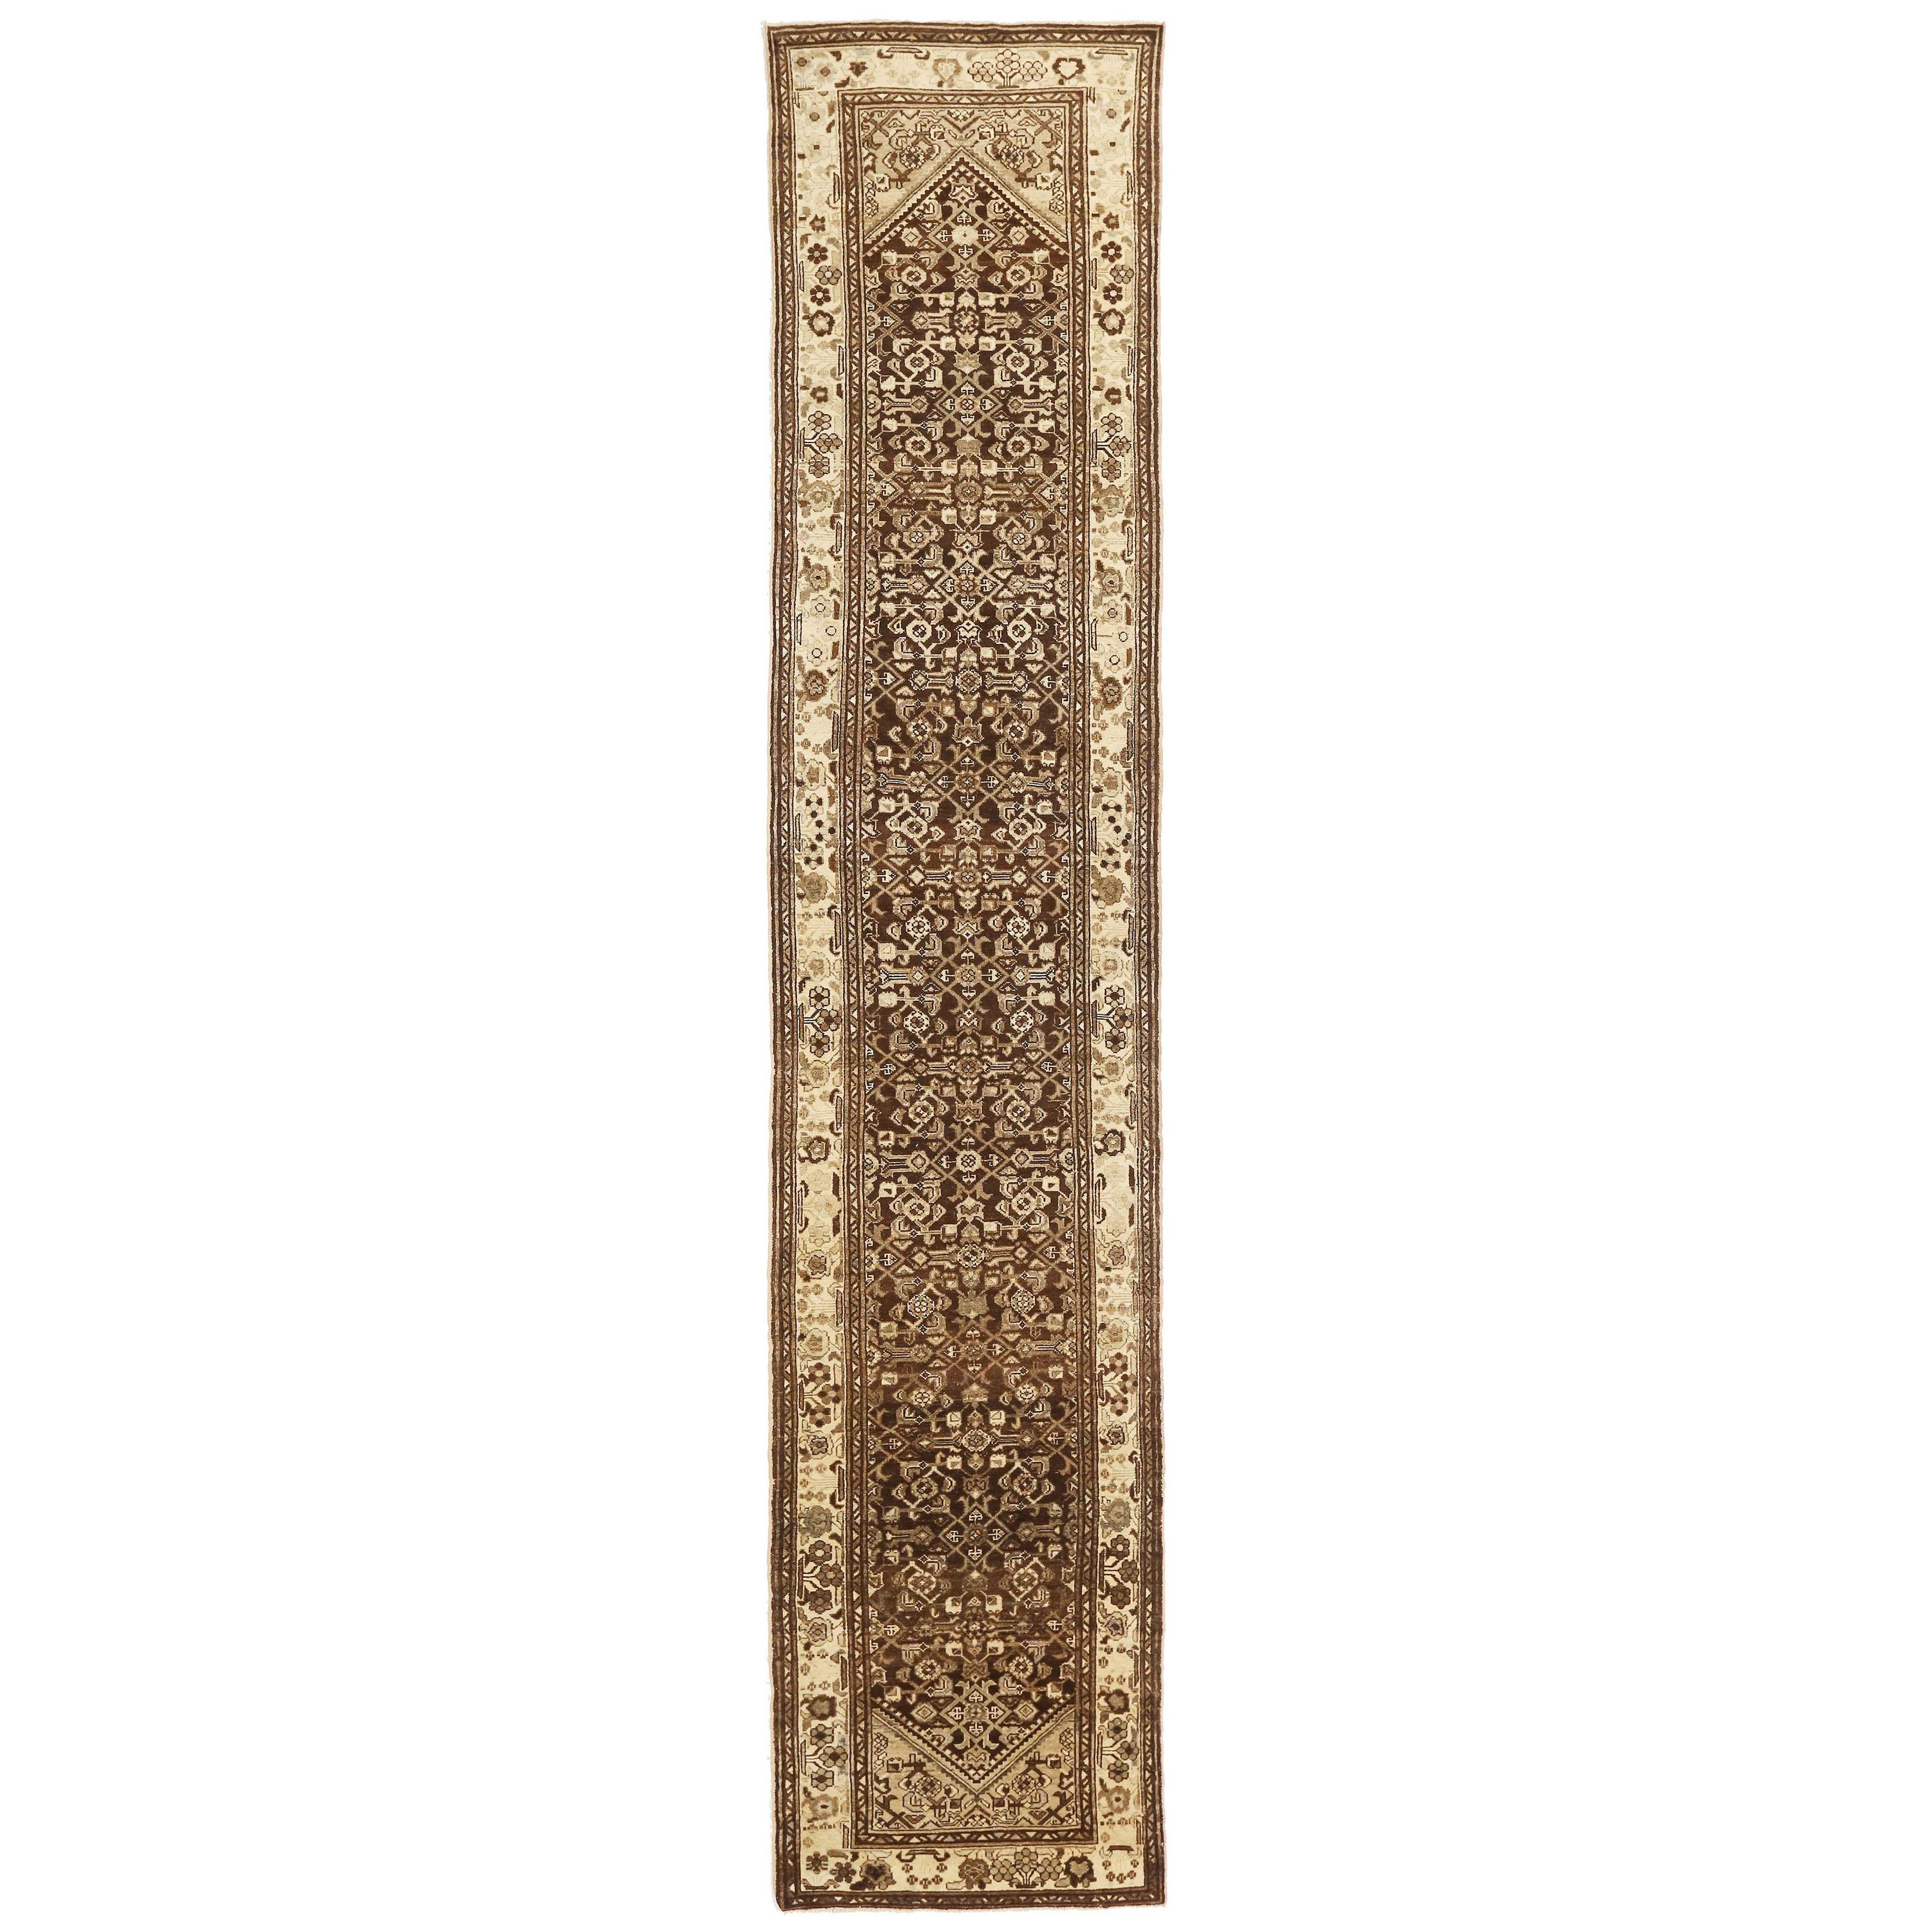 Antique Persian Malayer Runner Rug with Floral Details in Ivory